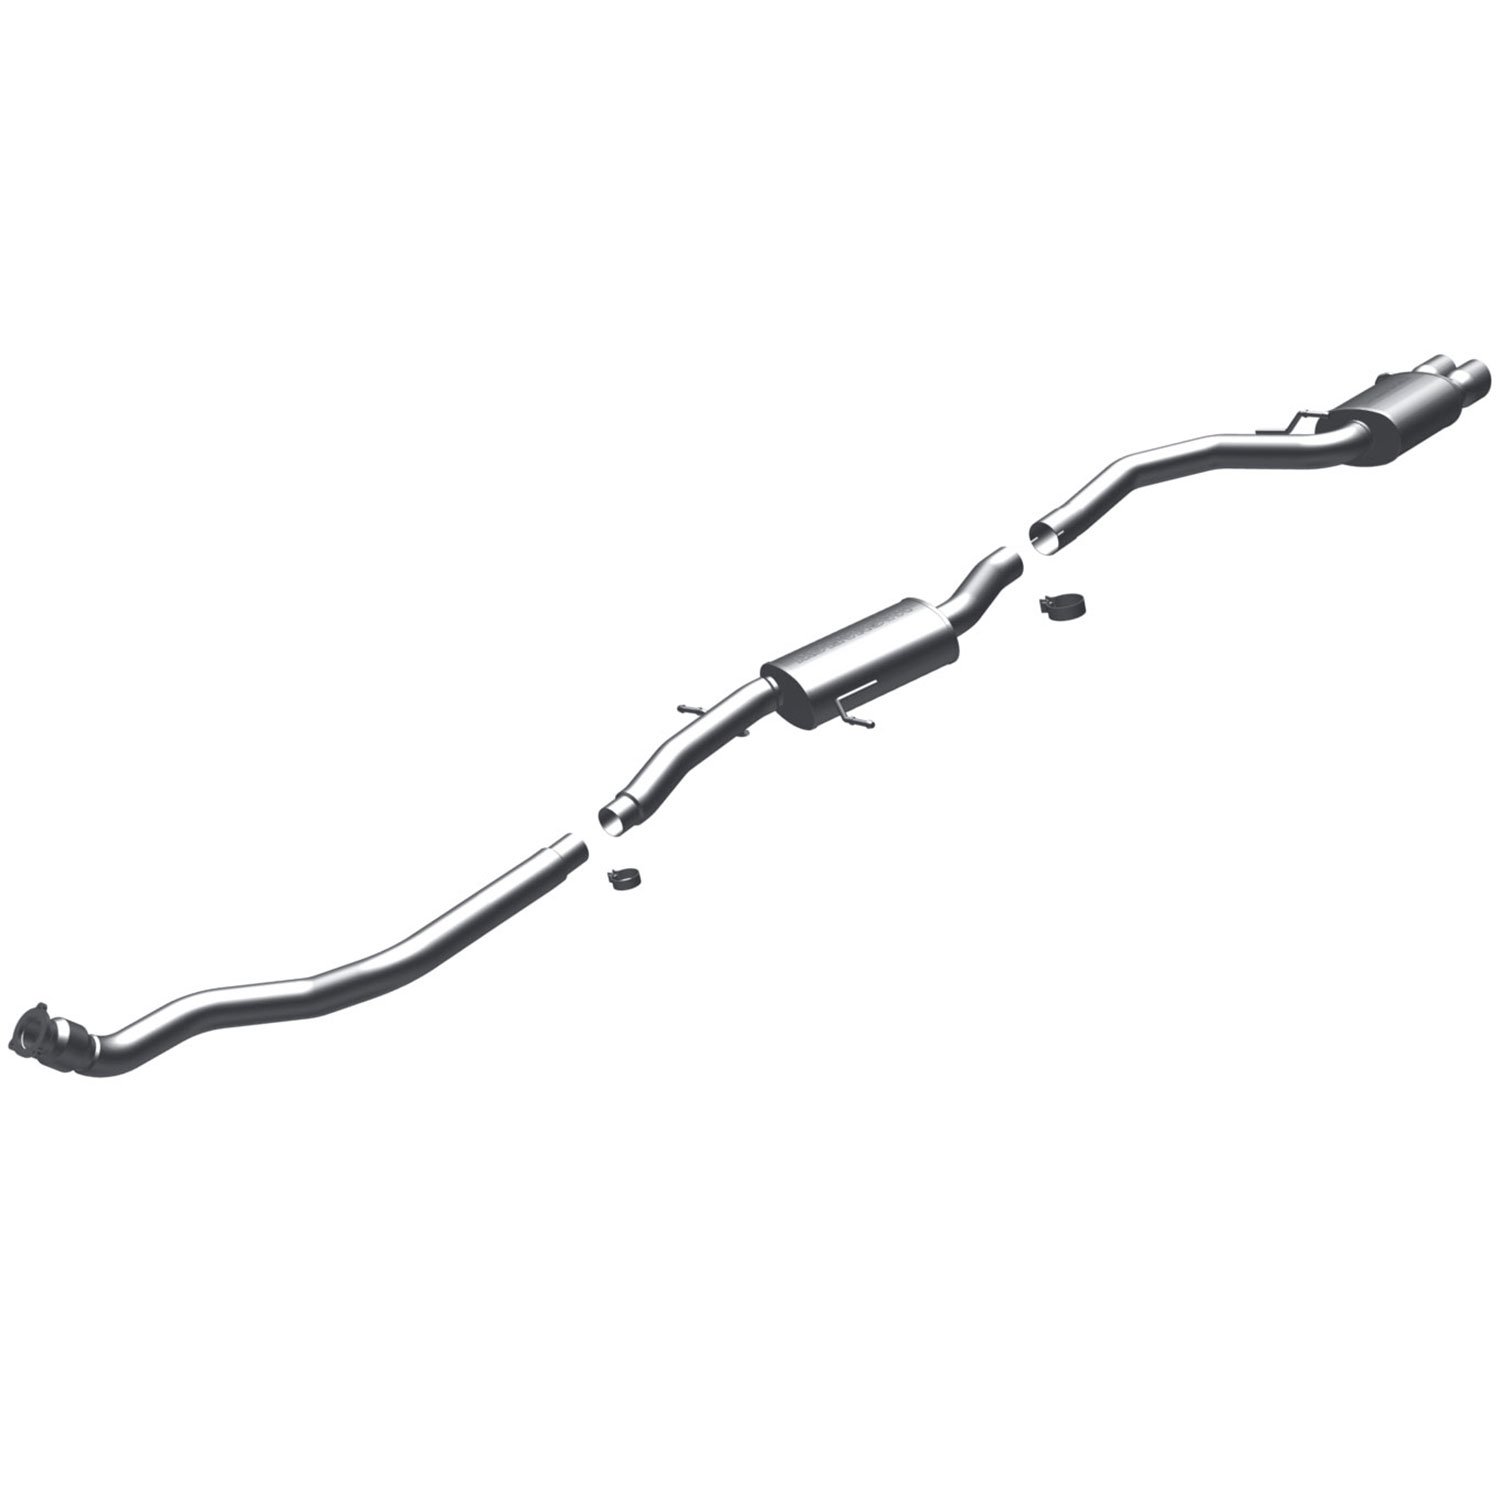 Sport Series Cat-Back Exhaust System 2010-14 Audi A5 Quattro 2.0L L4 3" Stainless Steel Tubing